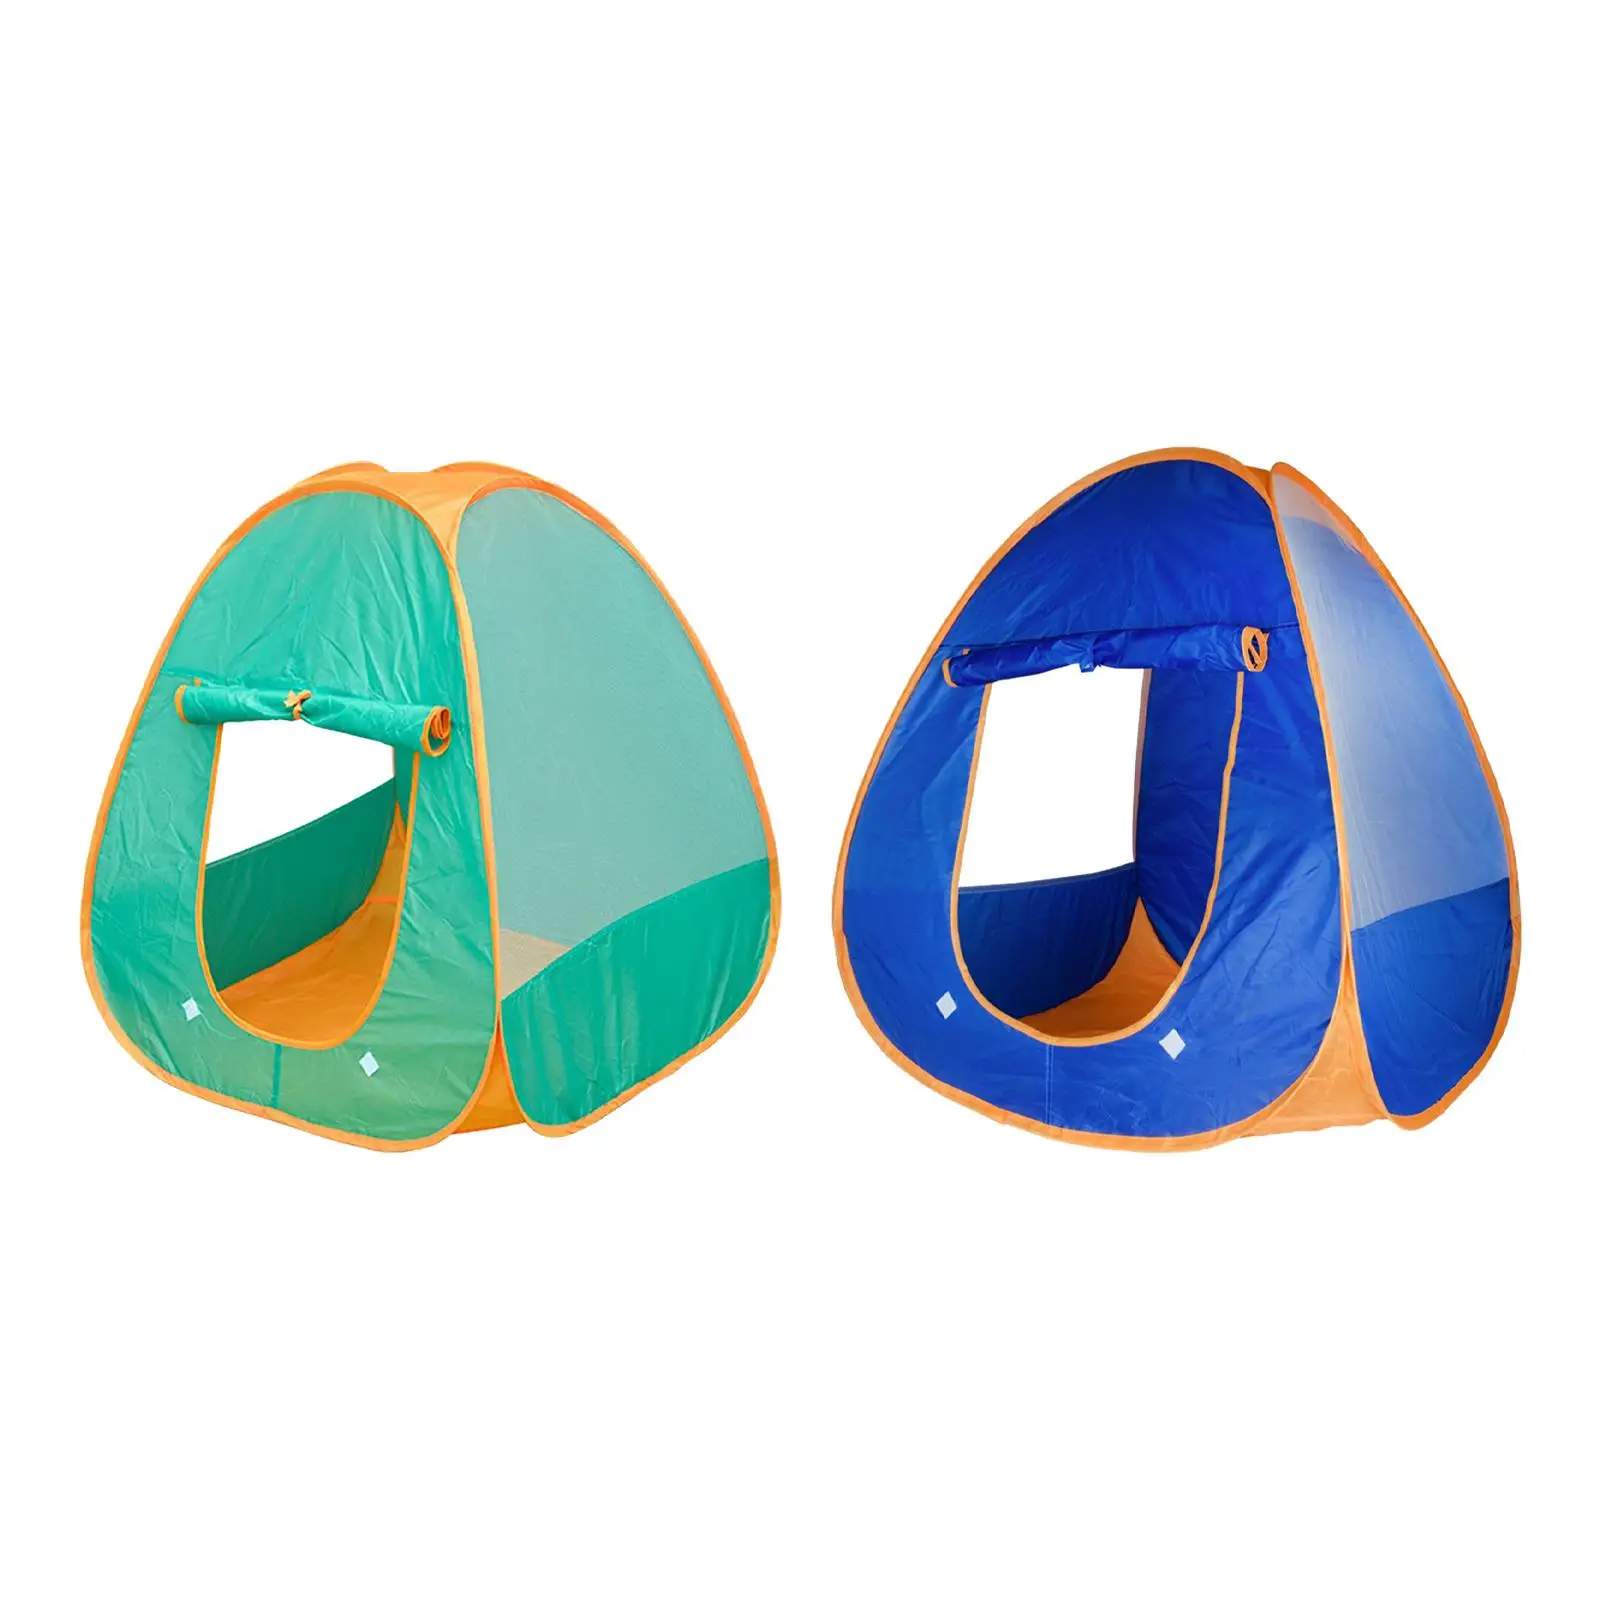 Kids Play Tent Collapsible Playhouse Toys for Game Indoor Outdoor